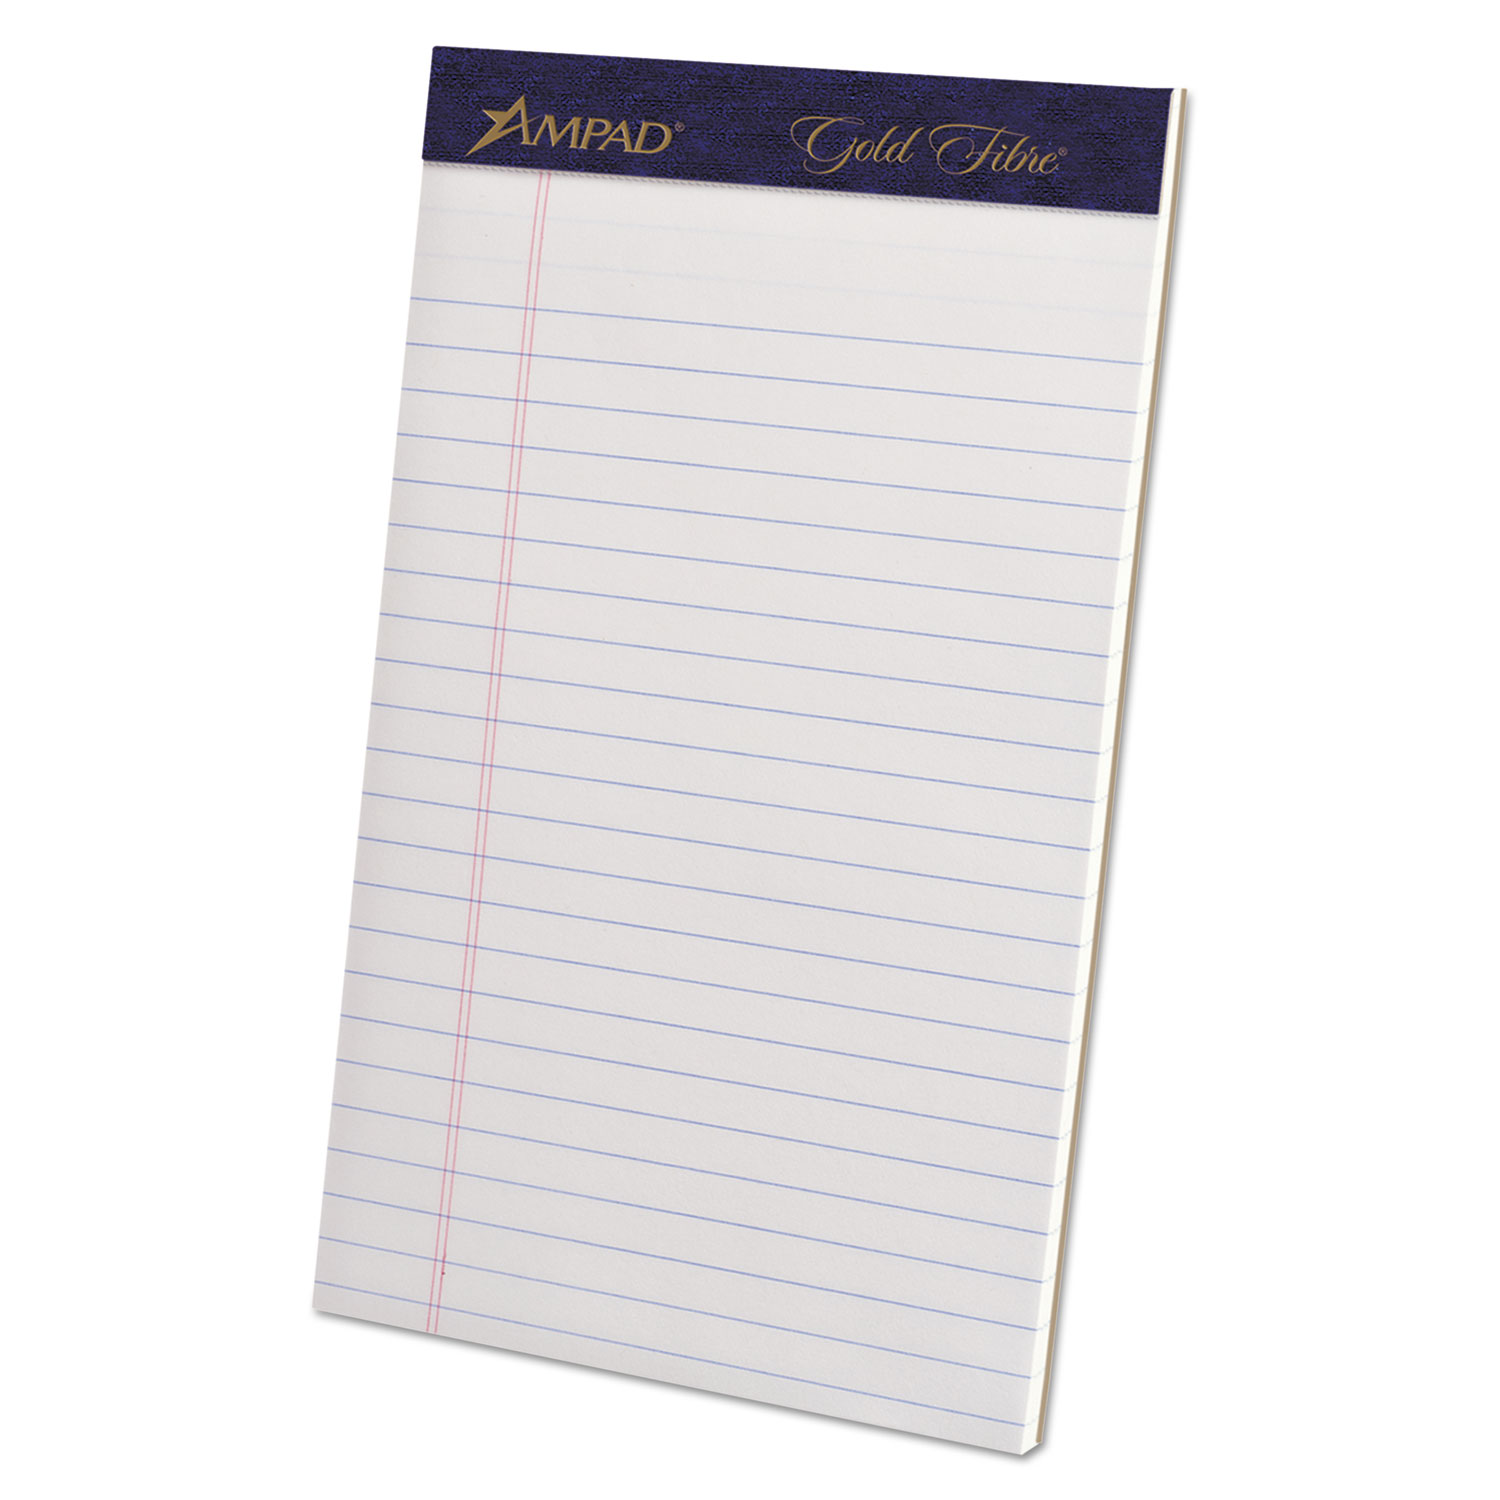  Ampad 20-018R Gold Fibre Writing Pads, Narrow Rule, 5 x 8, White, 50 Sheets, 4/Pack (TOP20018) 